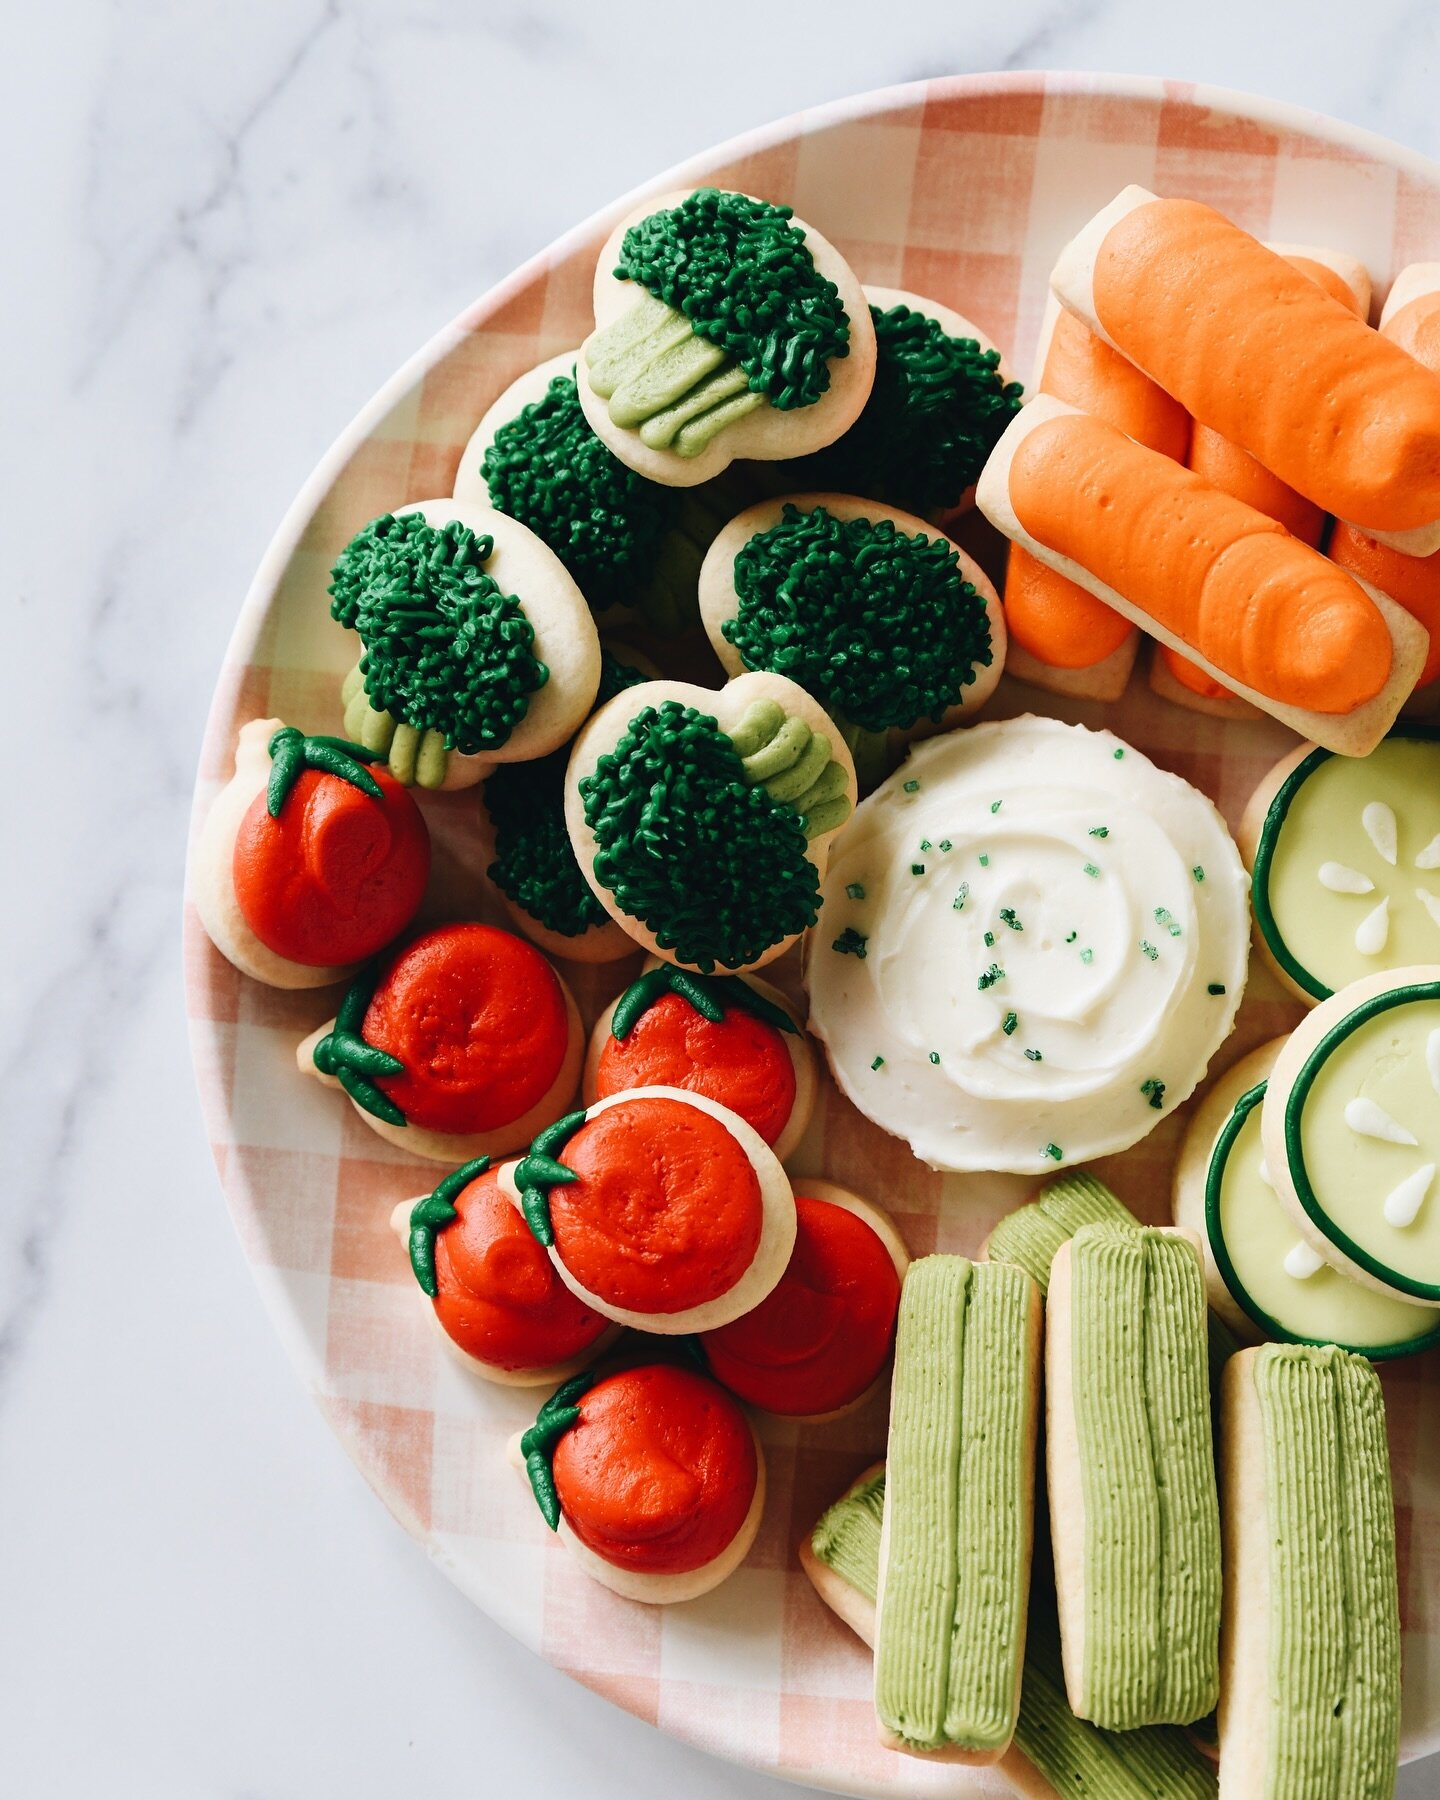 Volunteer to bring the veggies and dip to Easter this year!🥕🥦🍅🥒